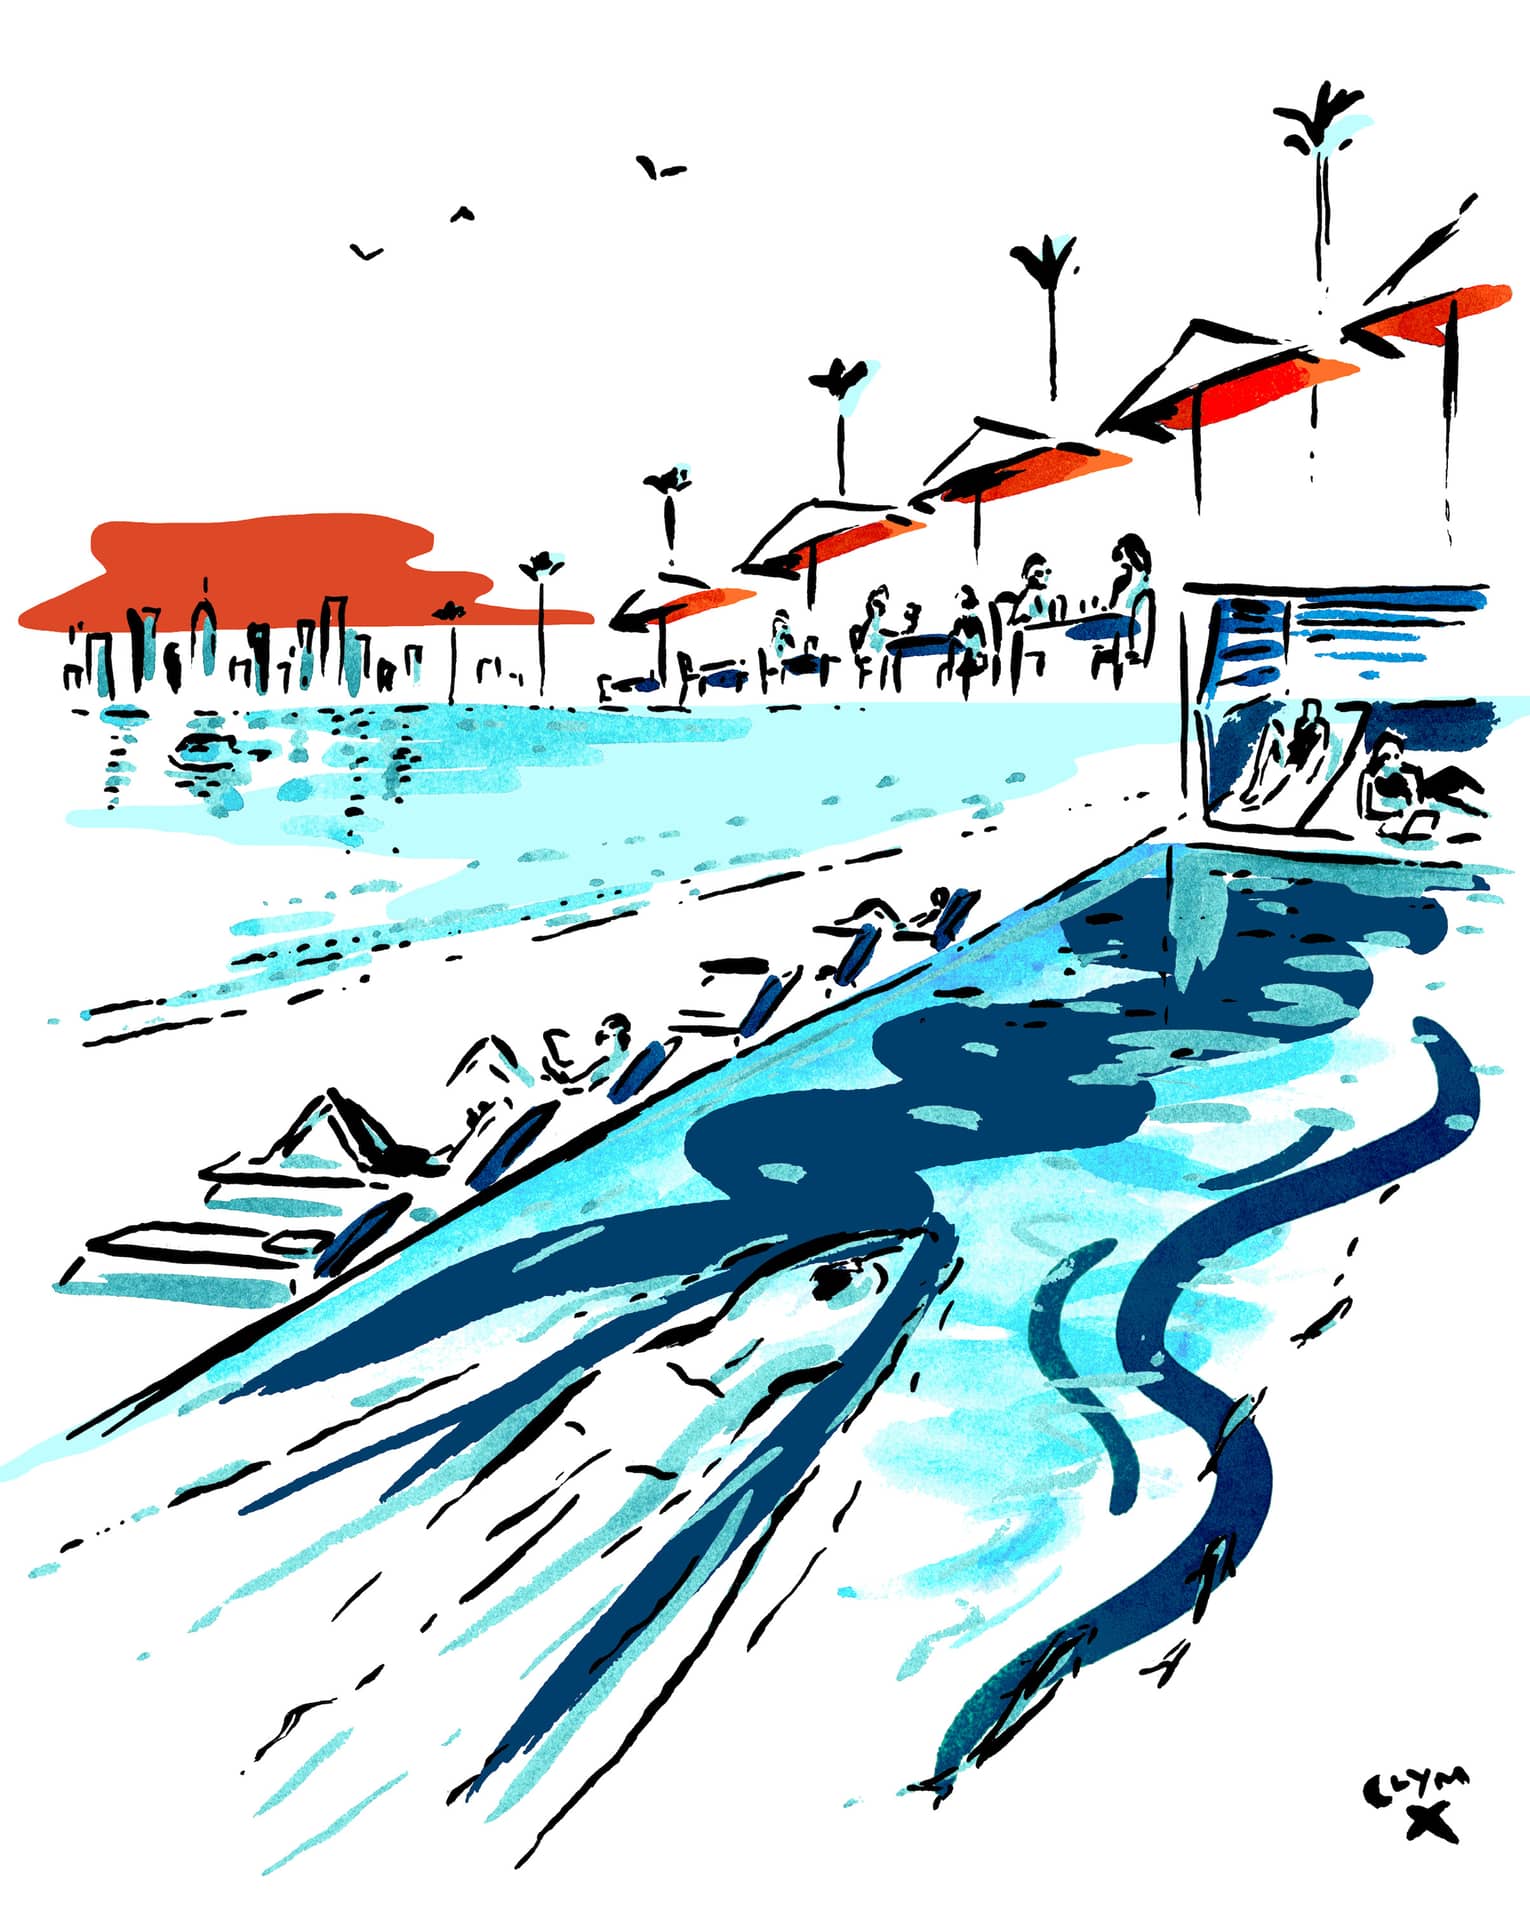 Illustration by Clym Evernden depicting an abstract version of the resort pool in various blues with pops of red